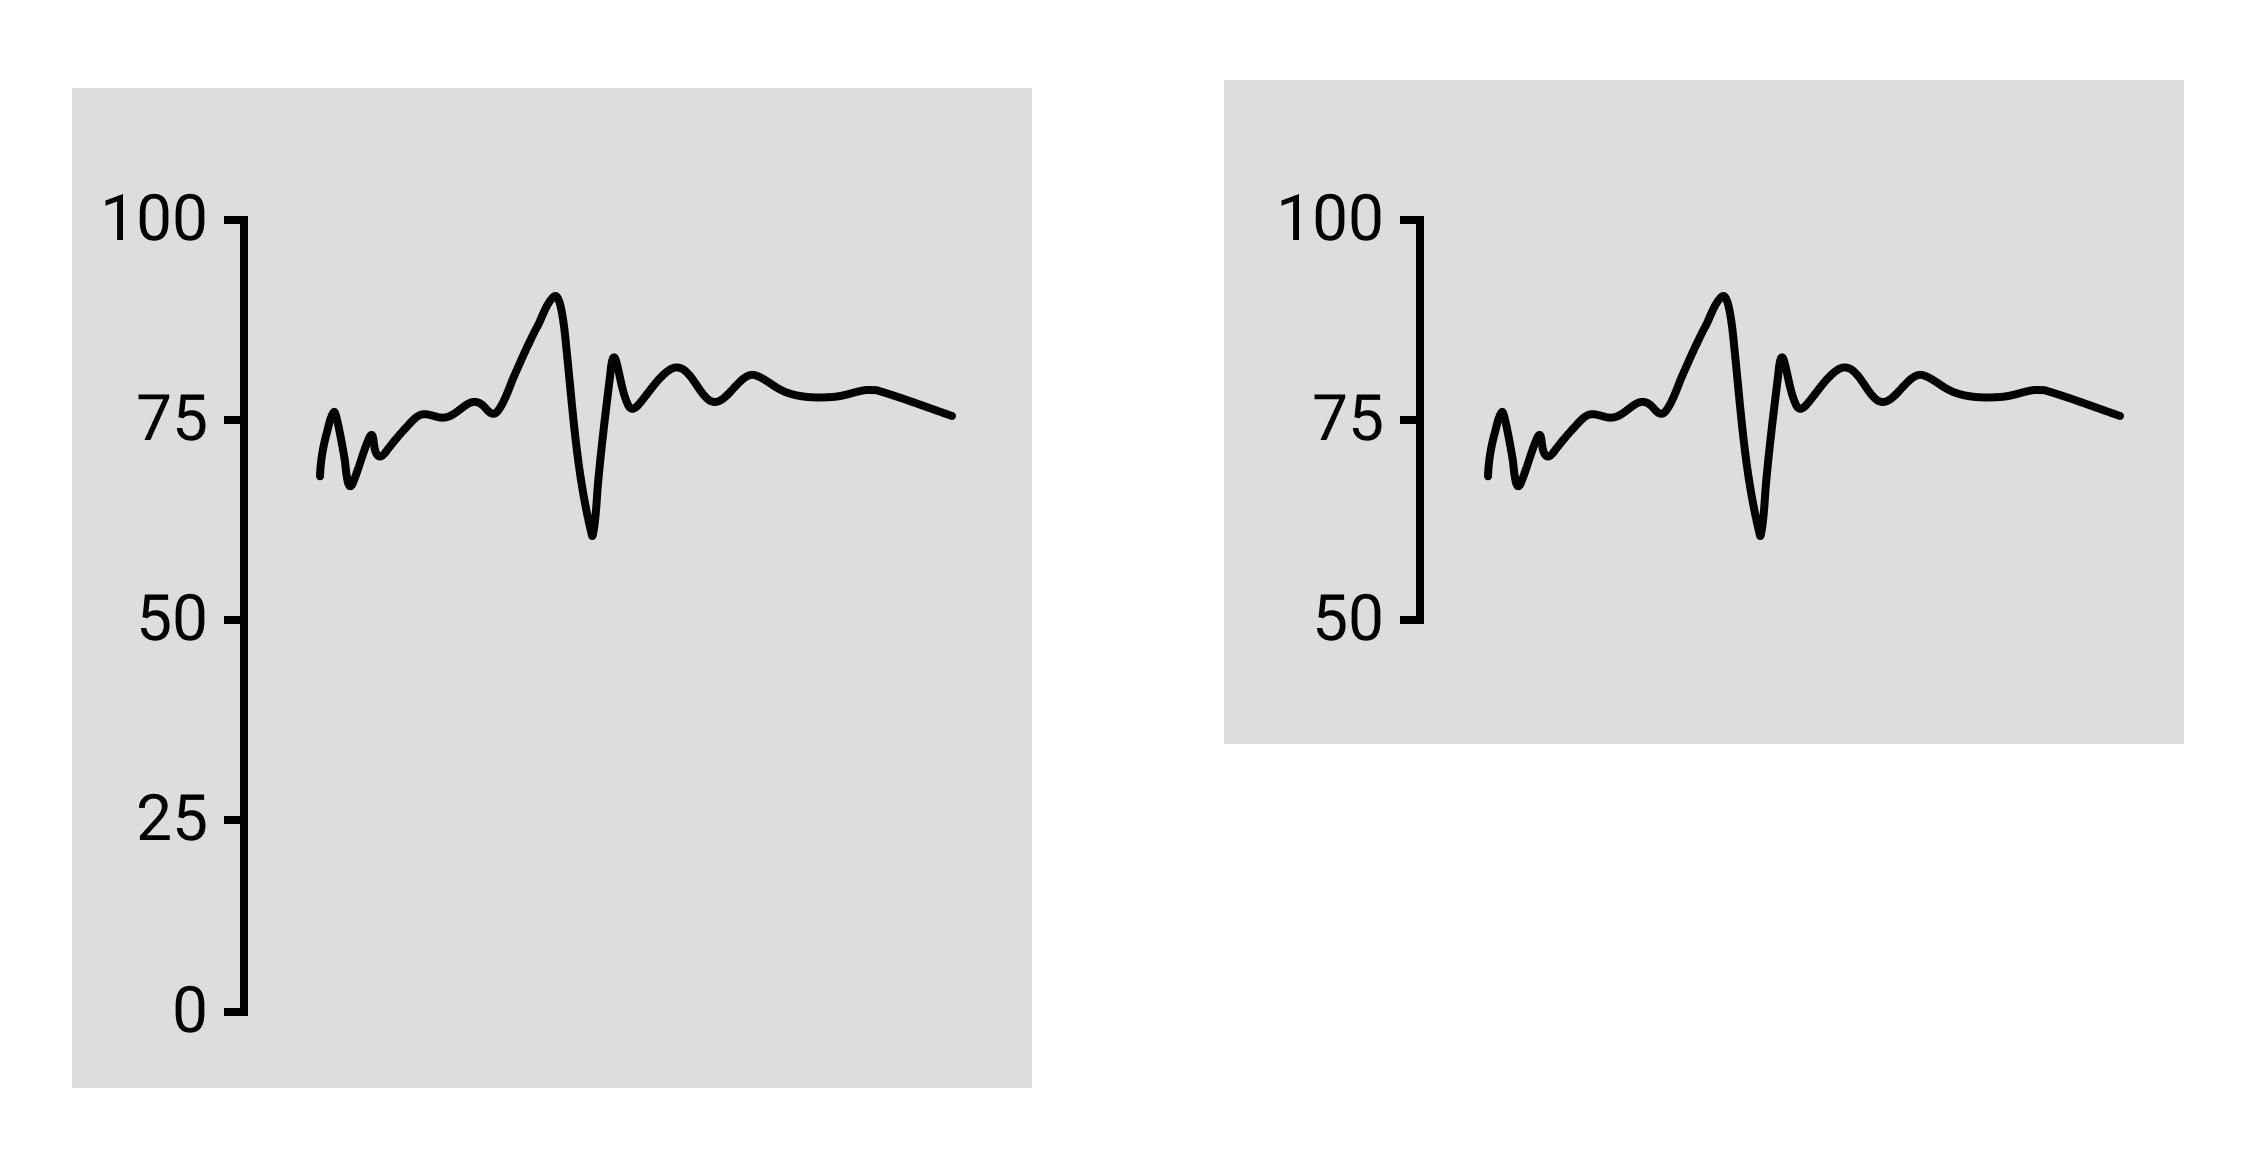 Since line charts do not require a zero baseline, both sides are correct.